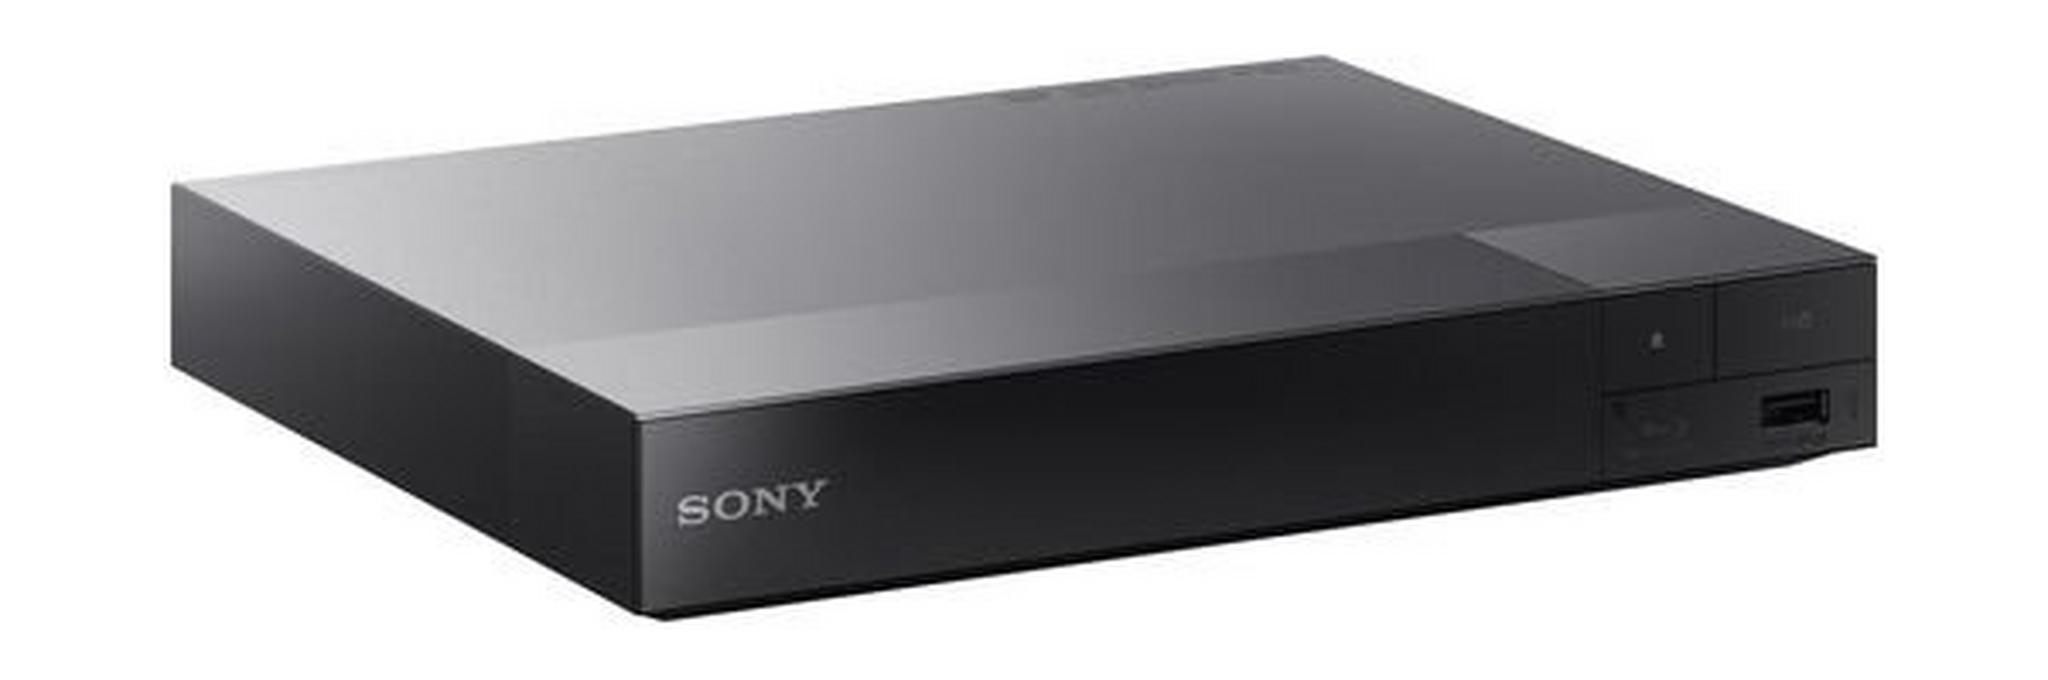 Sony Wired Streaming Blu-ray/DVD Player (BDP-S1500) - Black